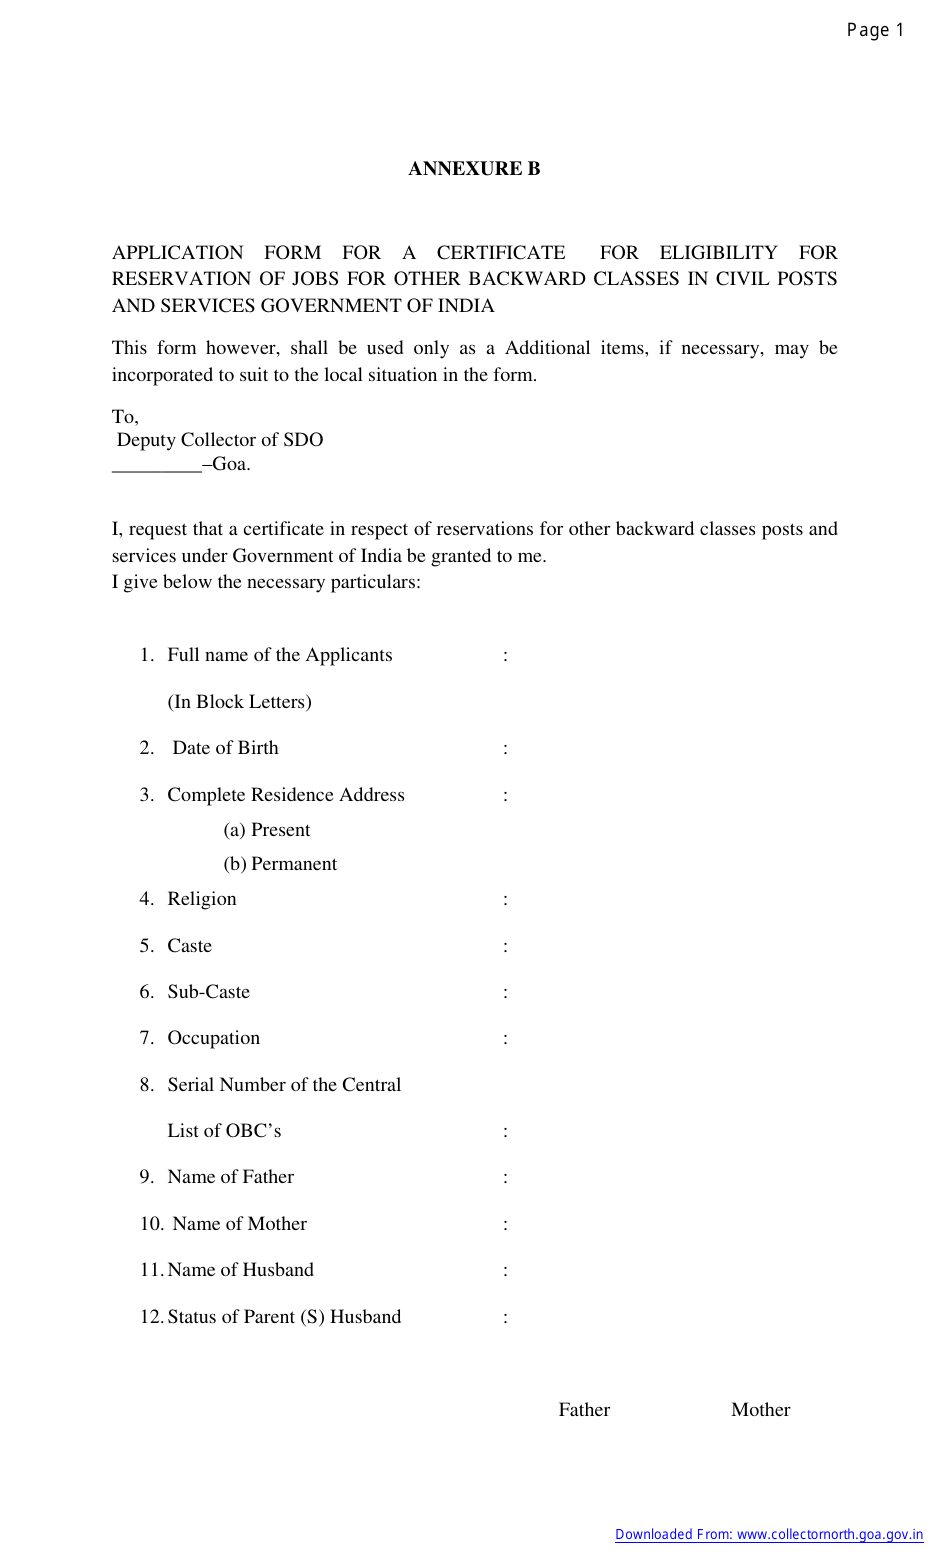 Application Form for a Certificate for Eligibility for Reservation of Jobs for Other Backward Classes in Civil Posts and Services - Goa, India, Page 1